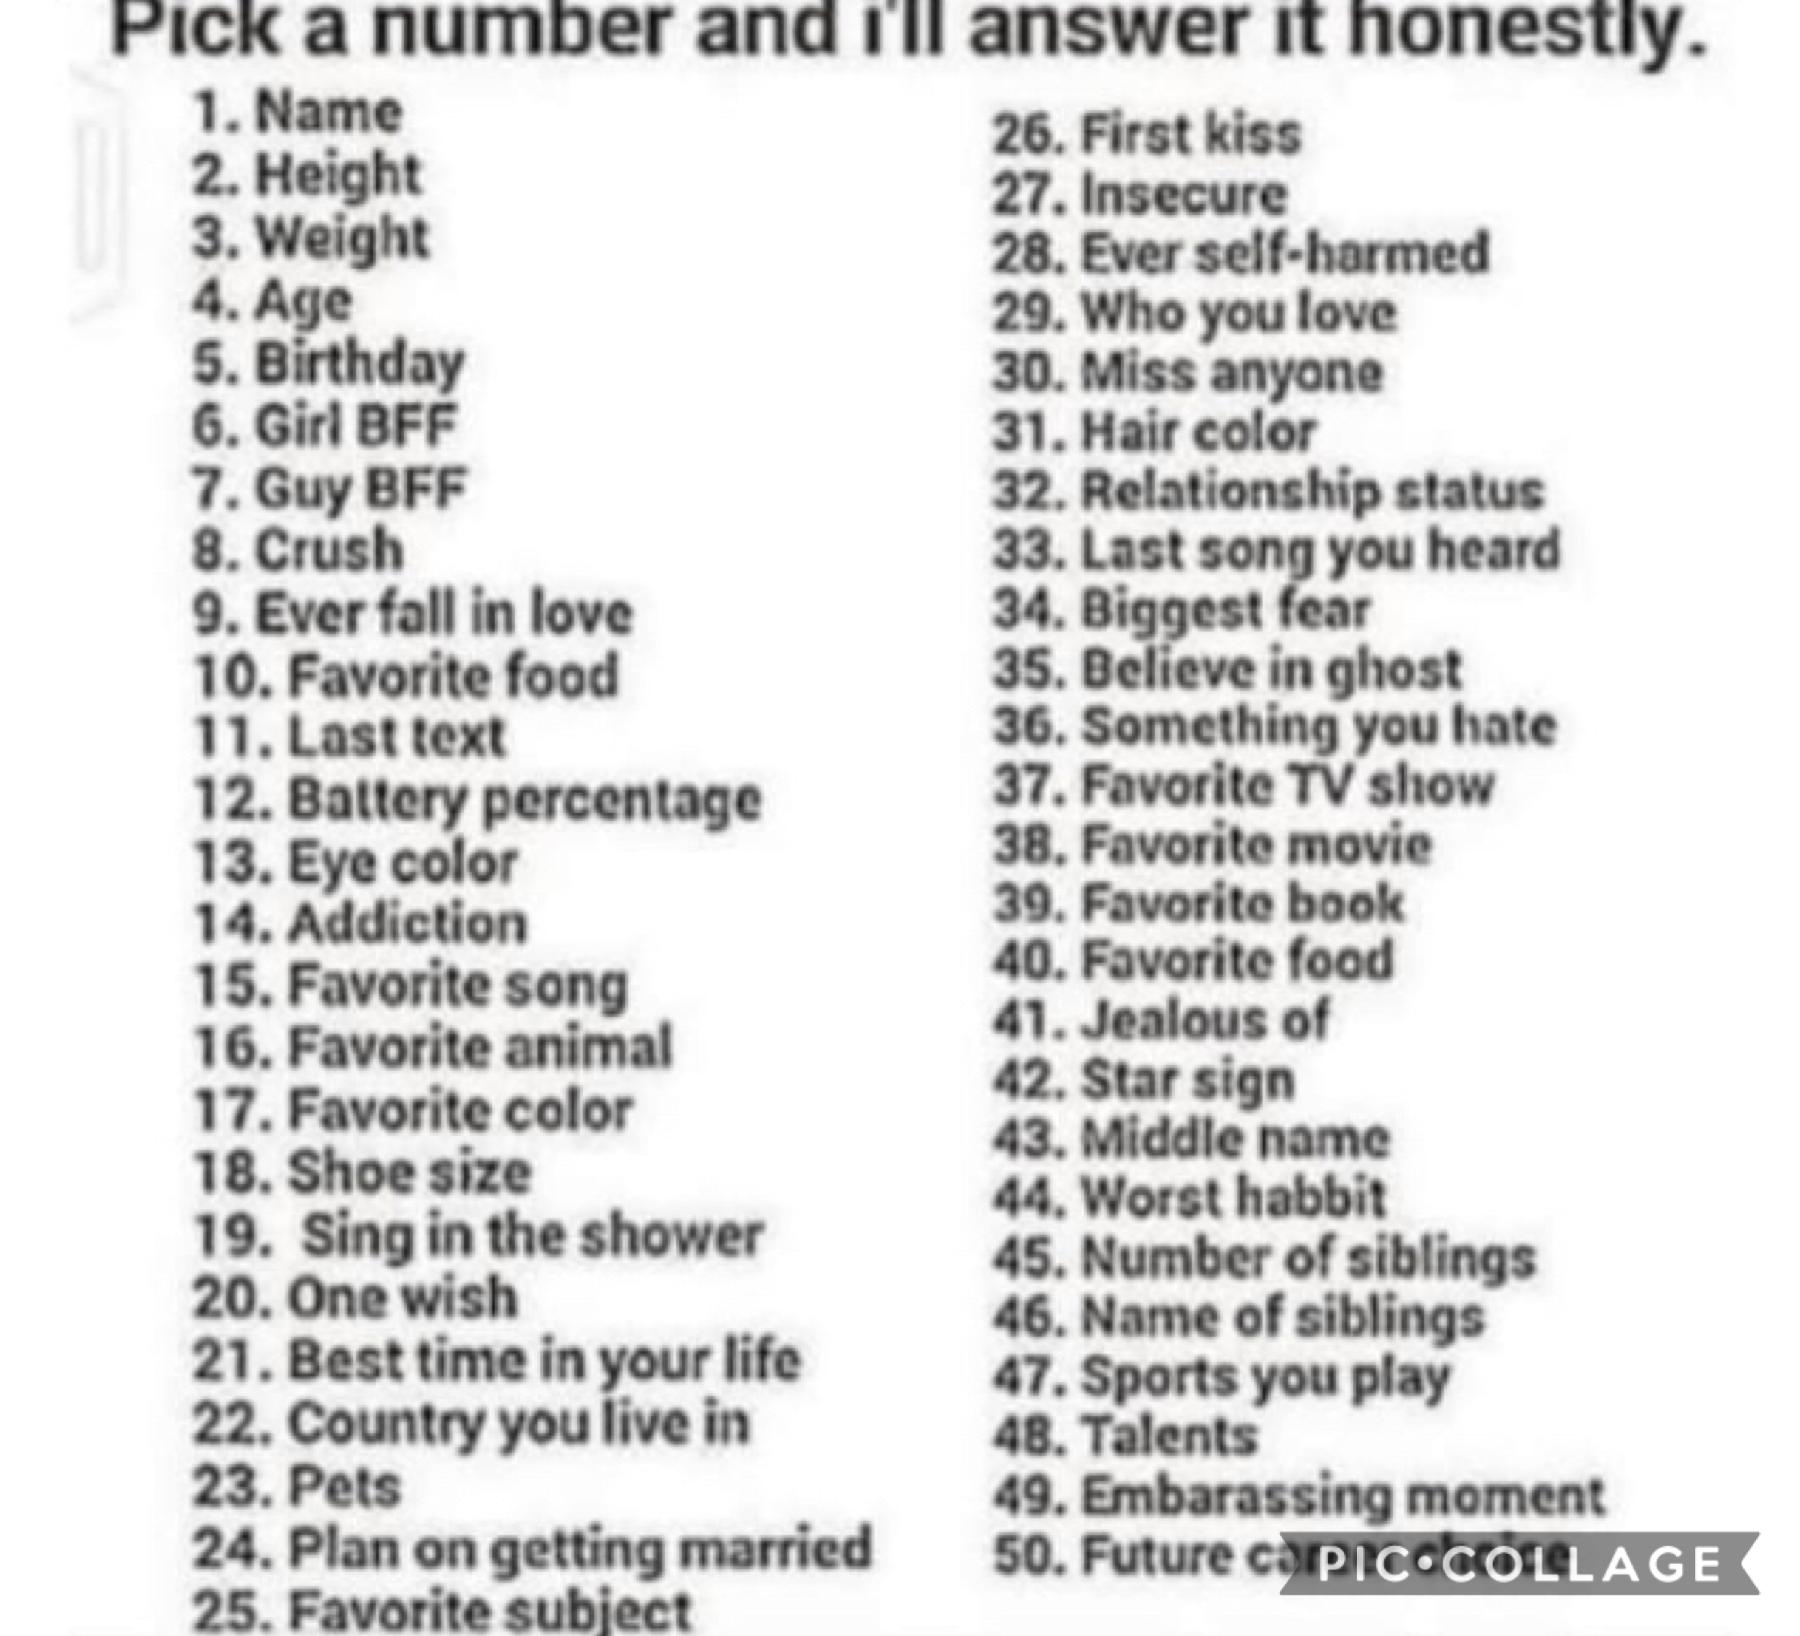 Took this from PenPom. I’ll answer any honestly!